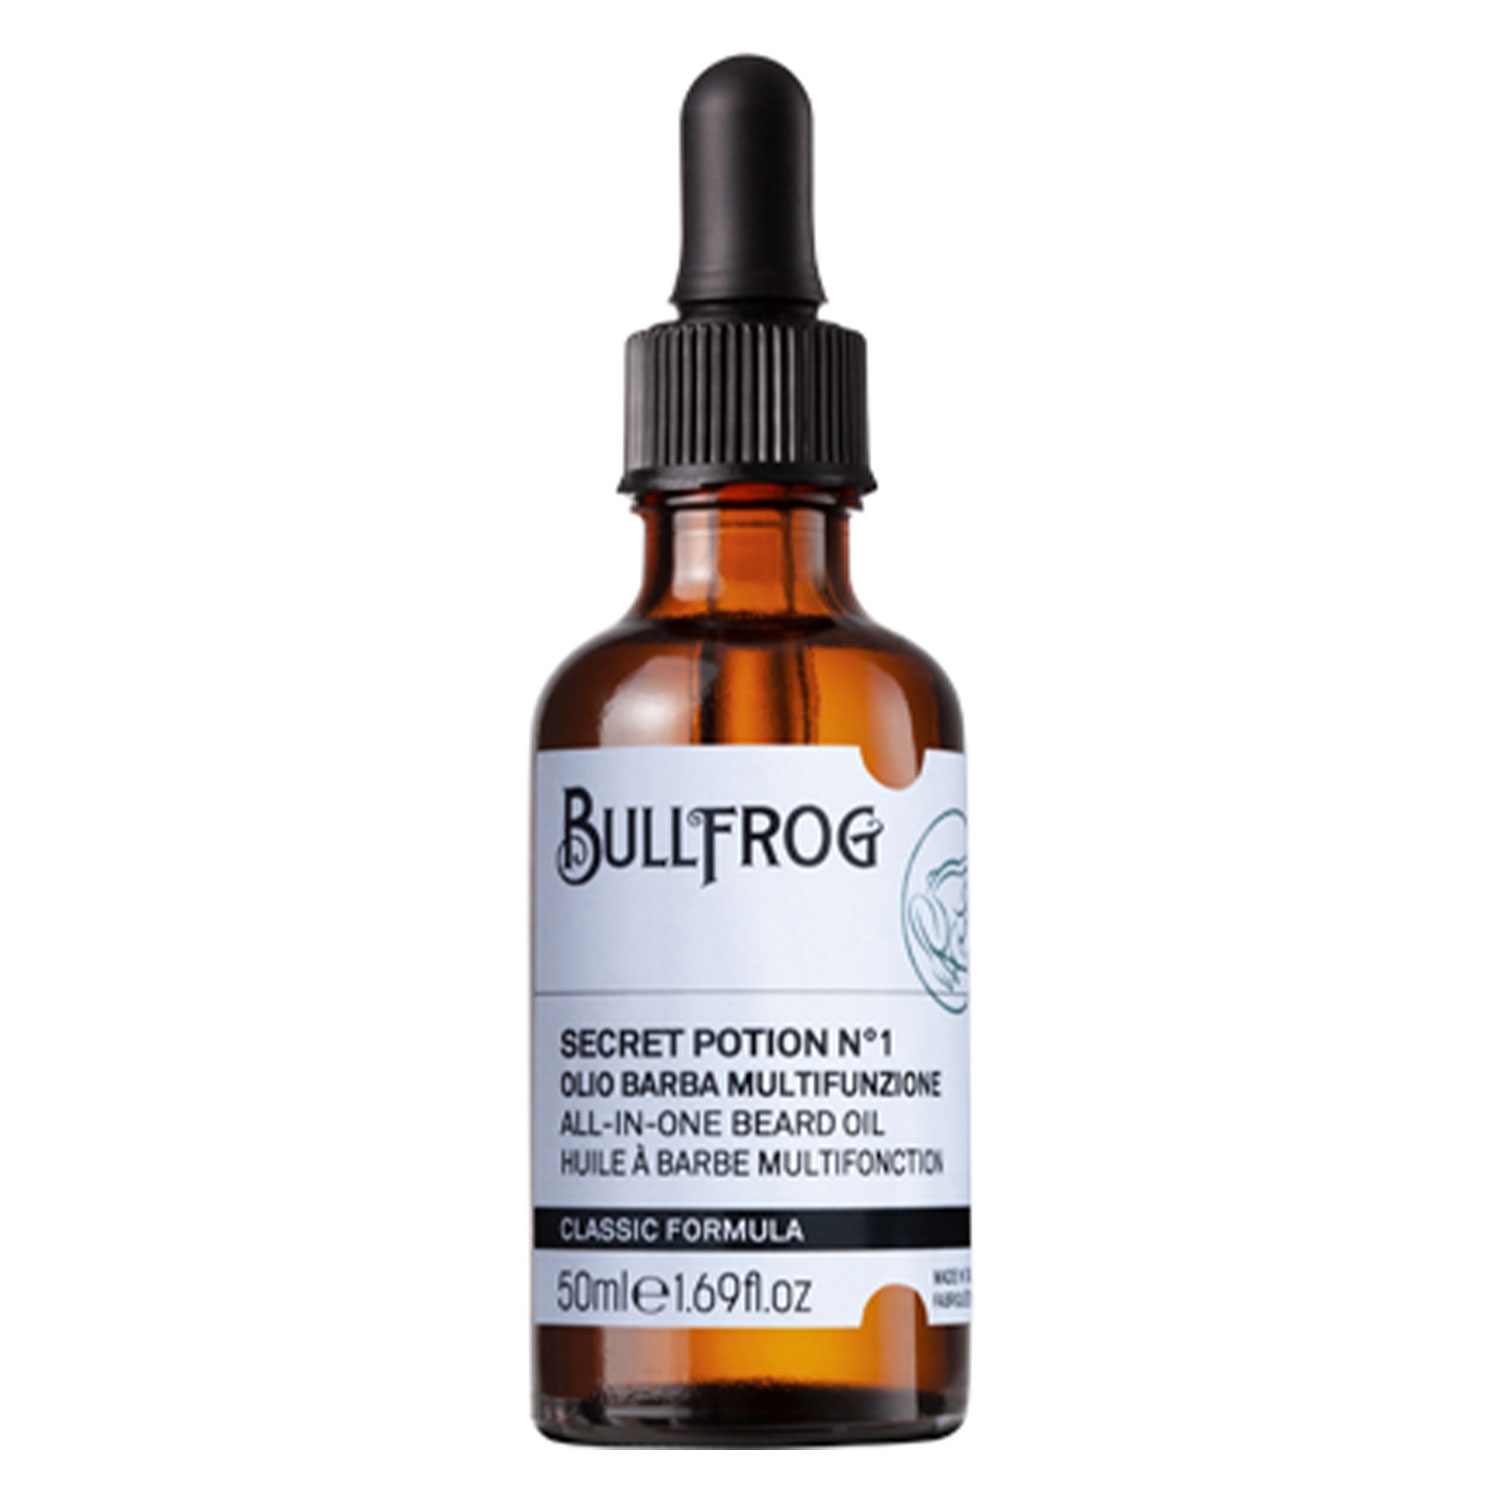 Product image from BULLFROG - All-in-One Beard Oil Secret Potion N°1